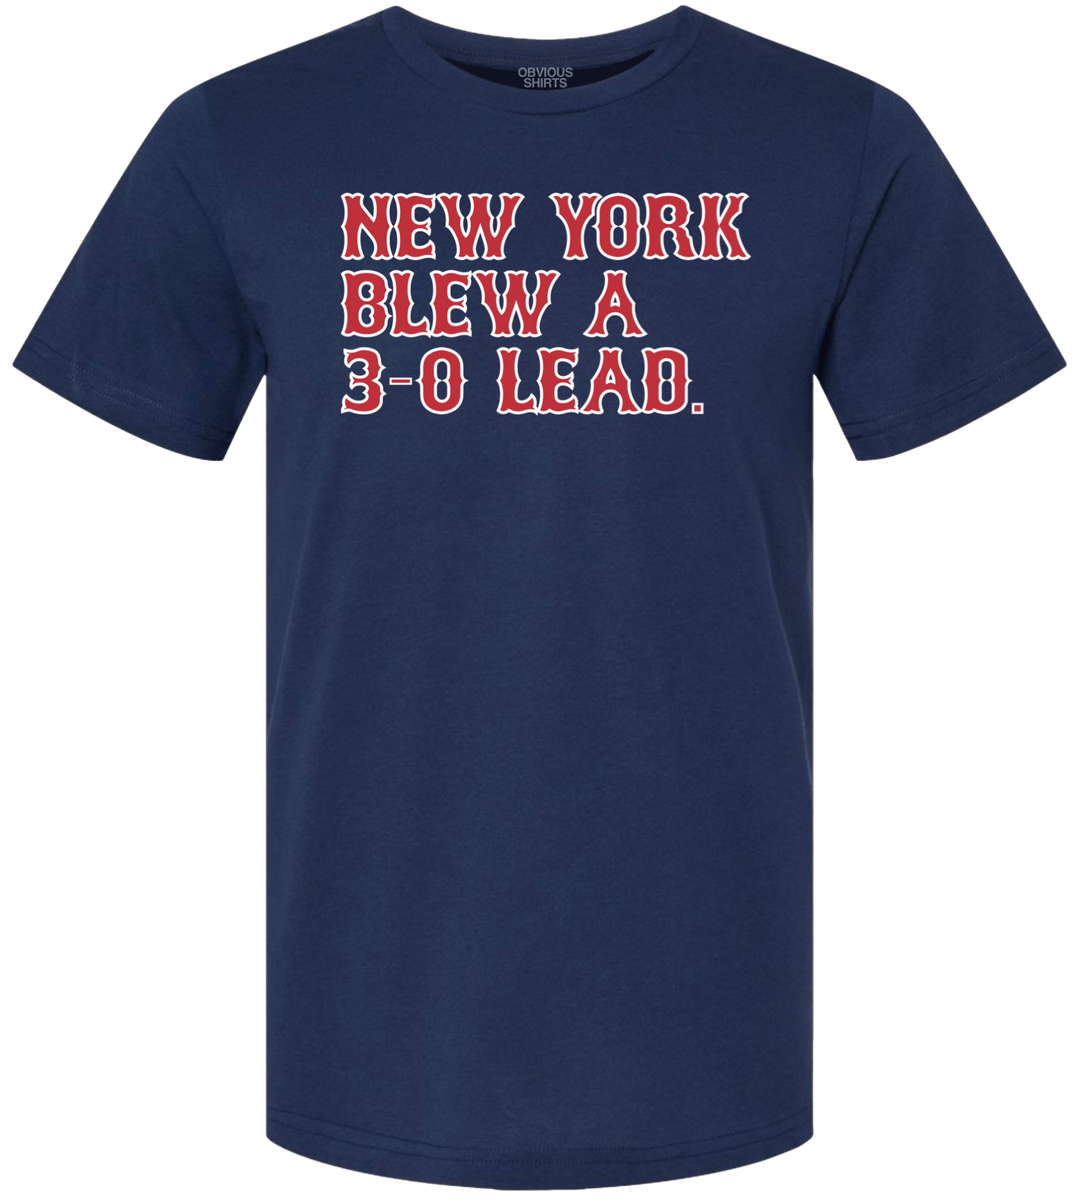 NEW YORK BLEW A 3-0 LEAD. - OBVIOUS SHIRTS